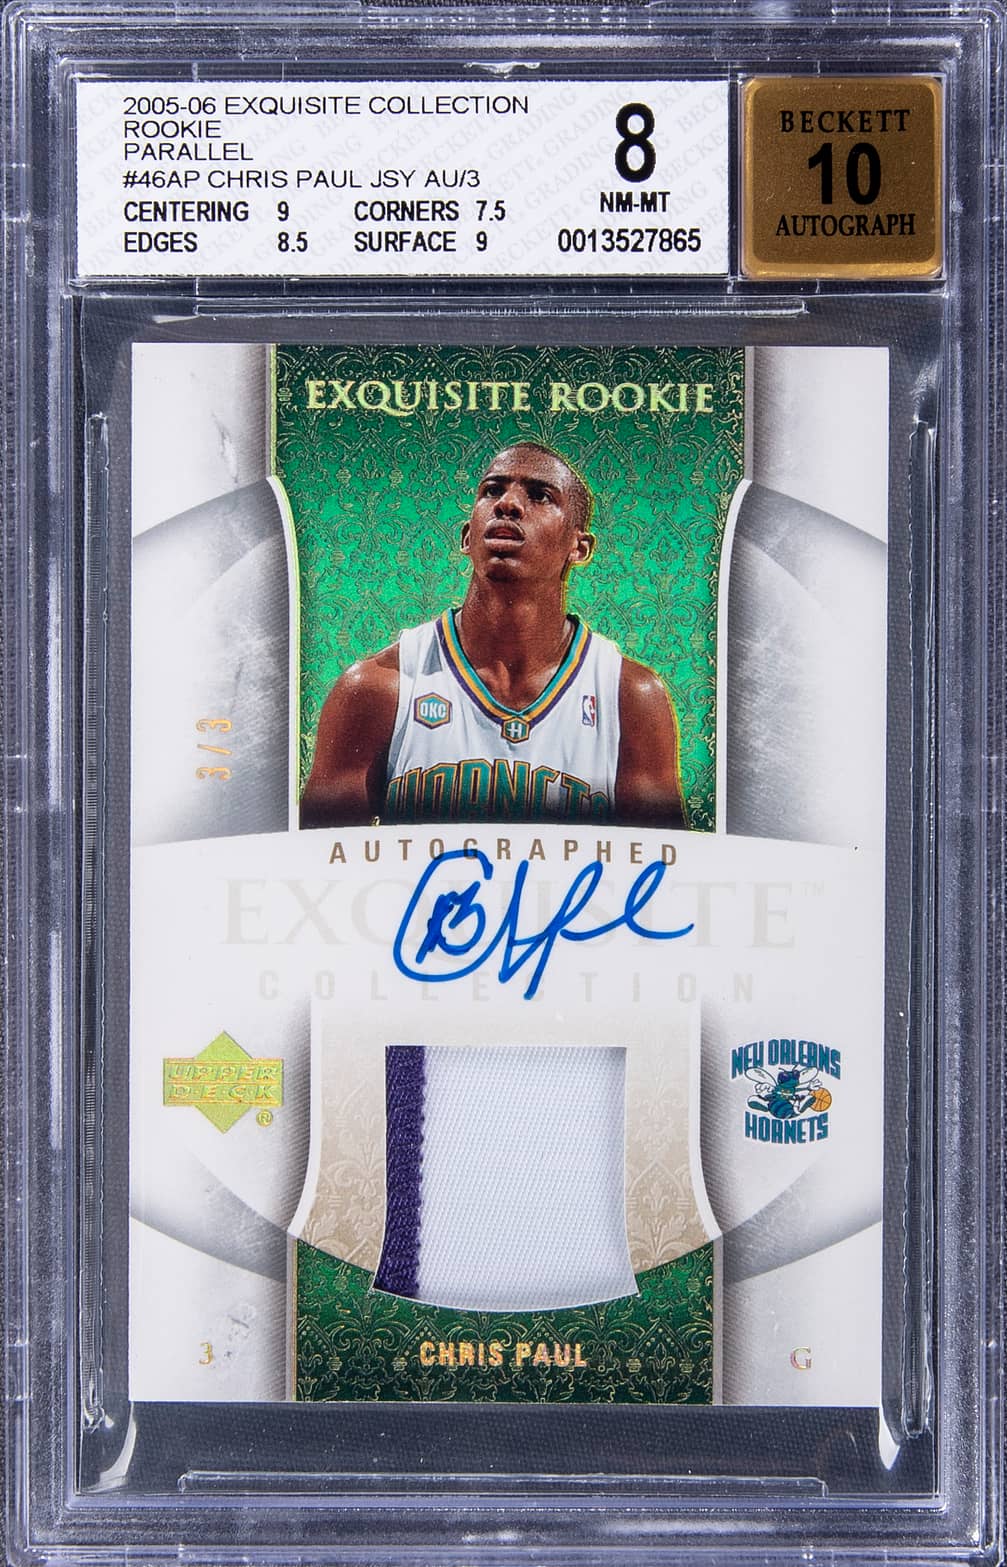 2005-06 UD "Exquisite Collection" Rookie Patch Autograph (RPA) Parallel #46-AP Chris Paul Signed Game Used Patch Rookie Card (#3/3) – Paul's Jersey Number! – BGS NM-MT 8/BGS 10